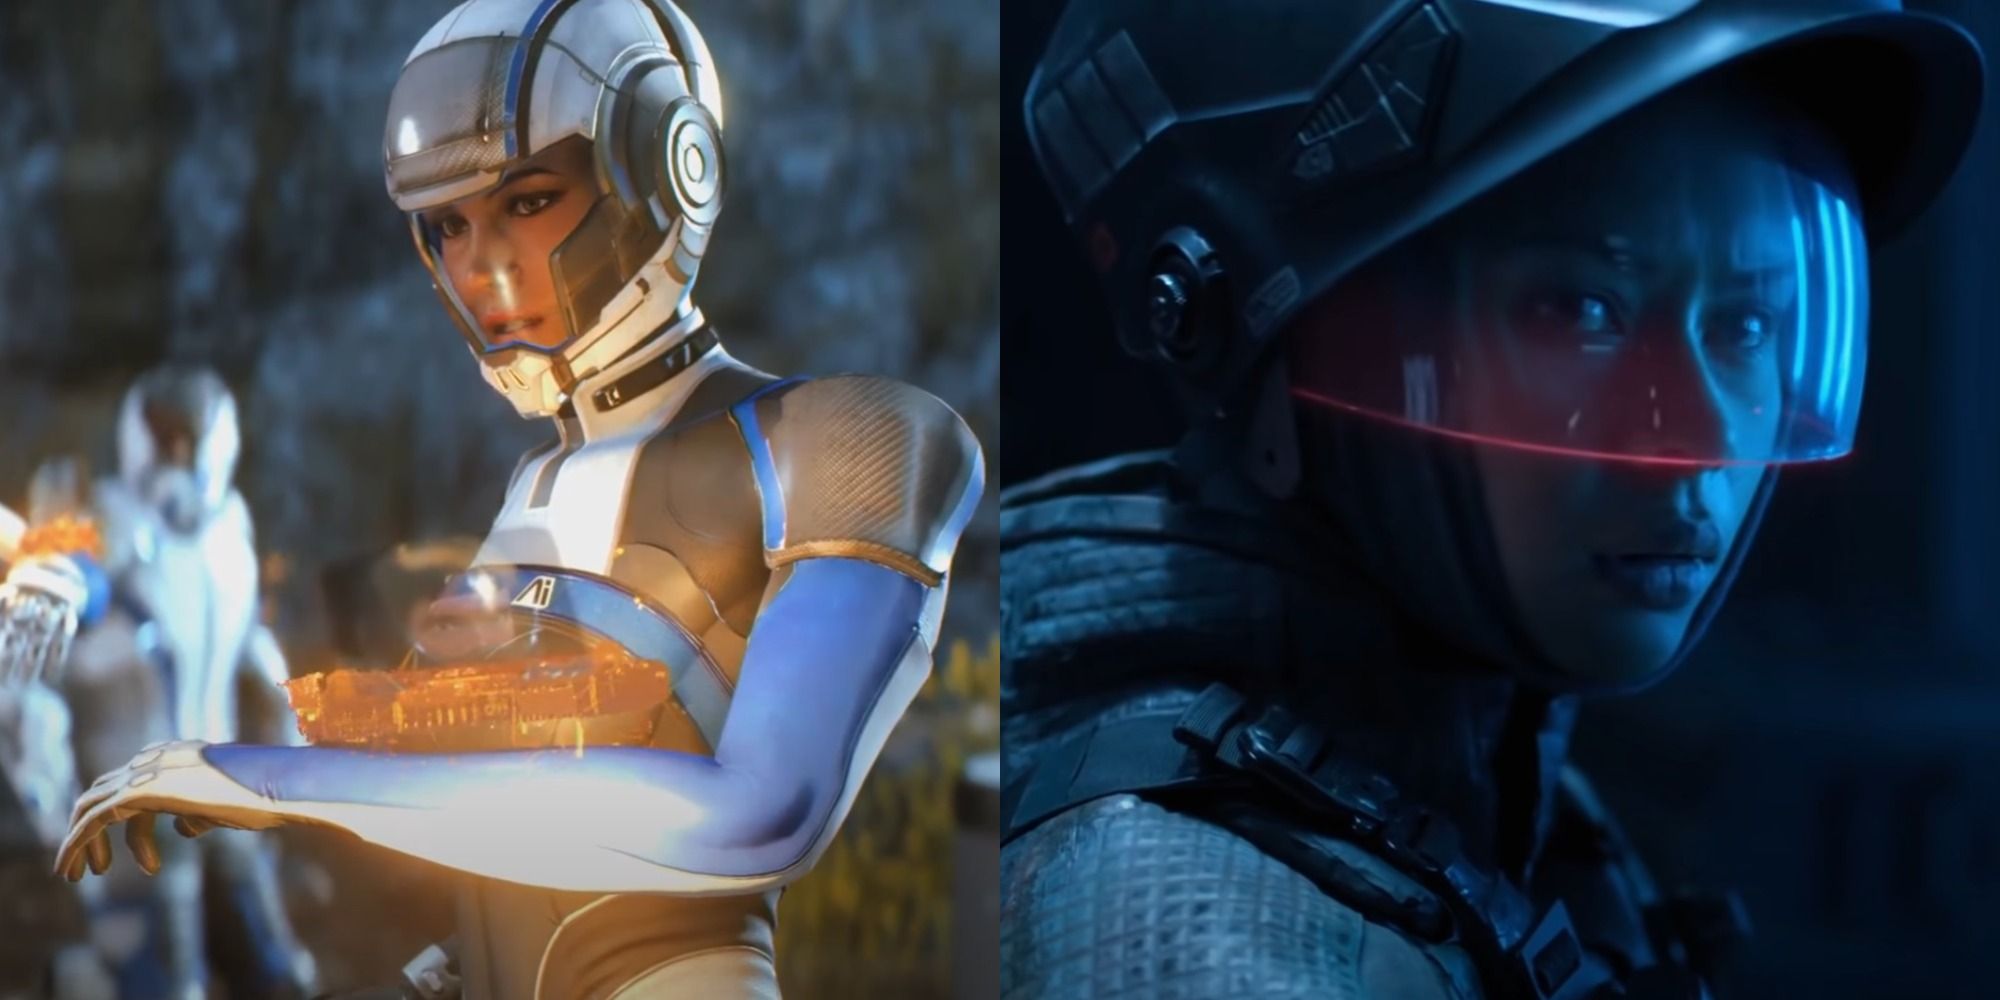 If You Need More Mass Effect Please Try The Expanse